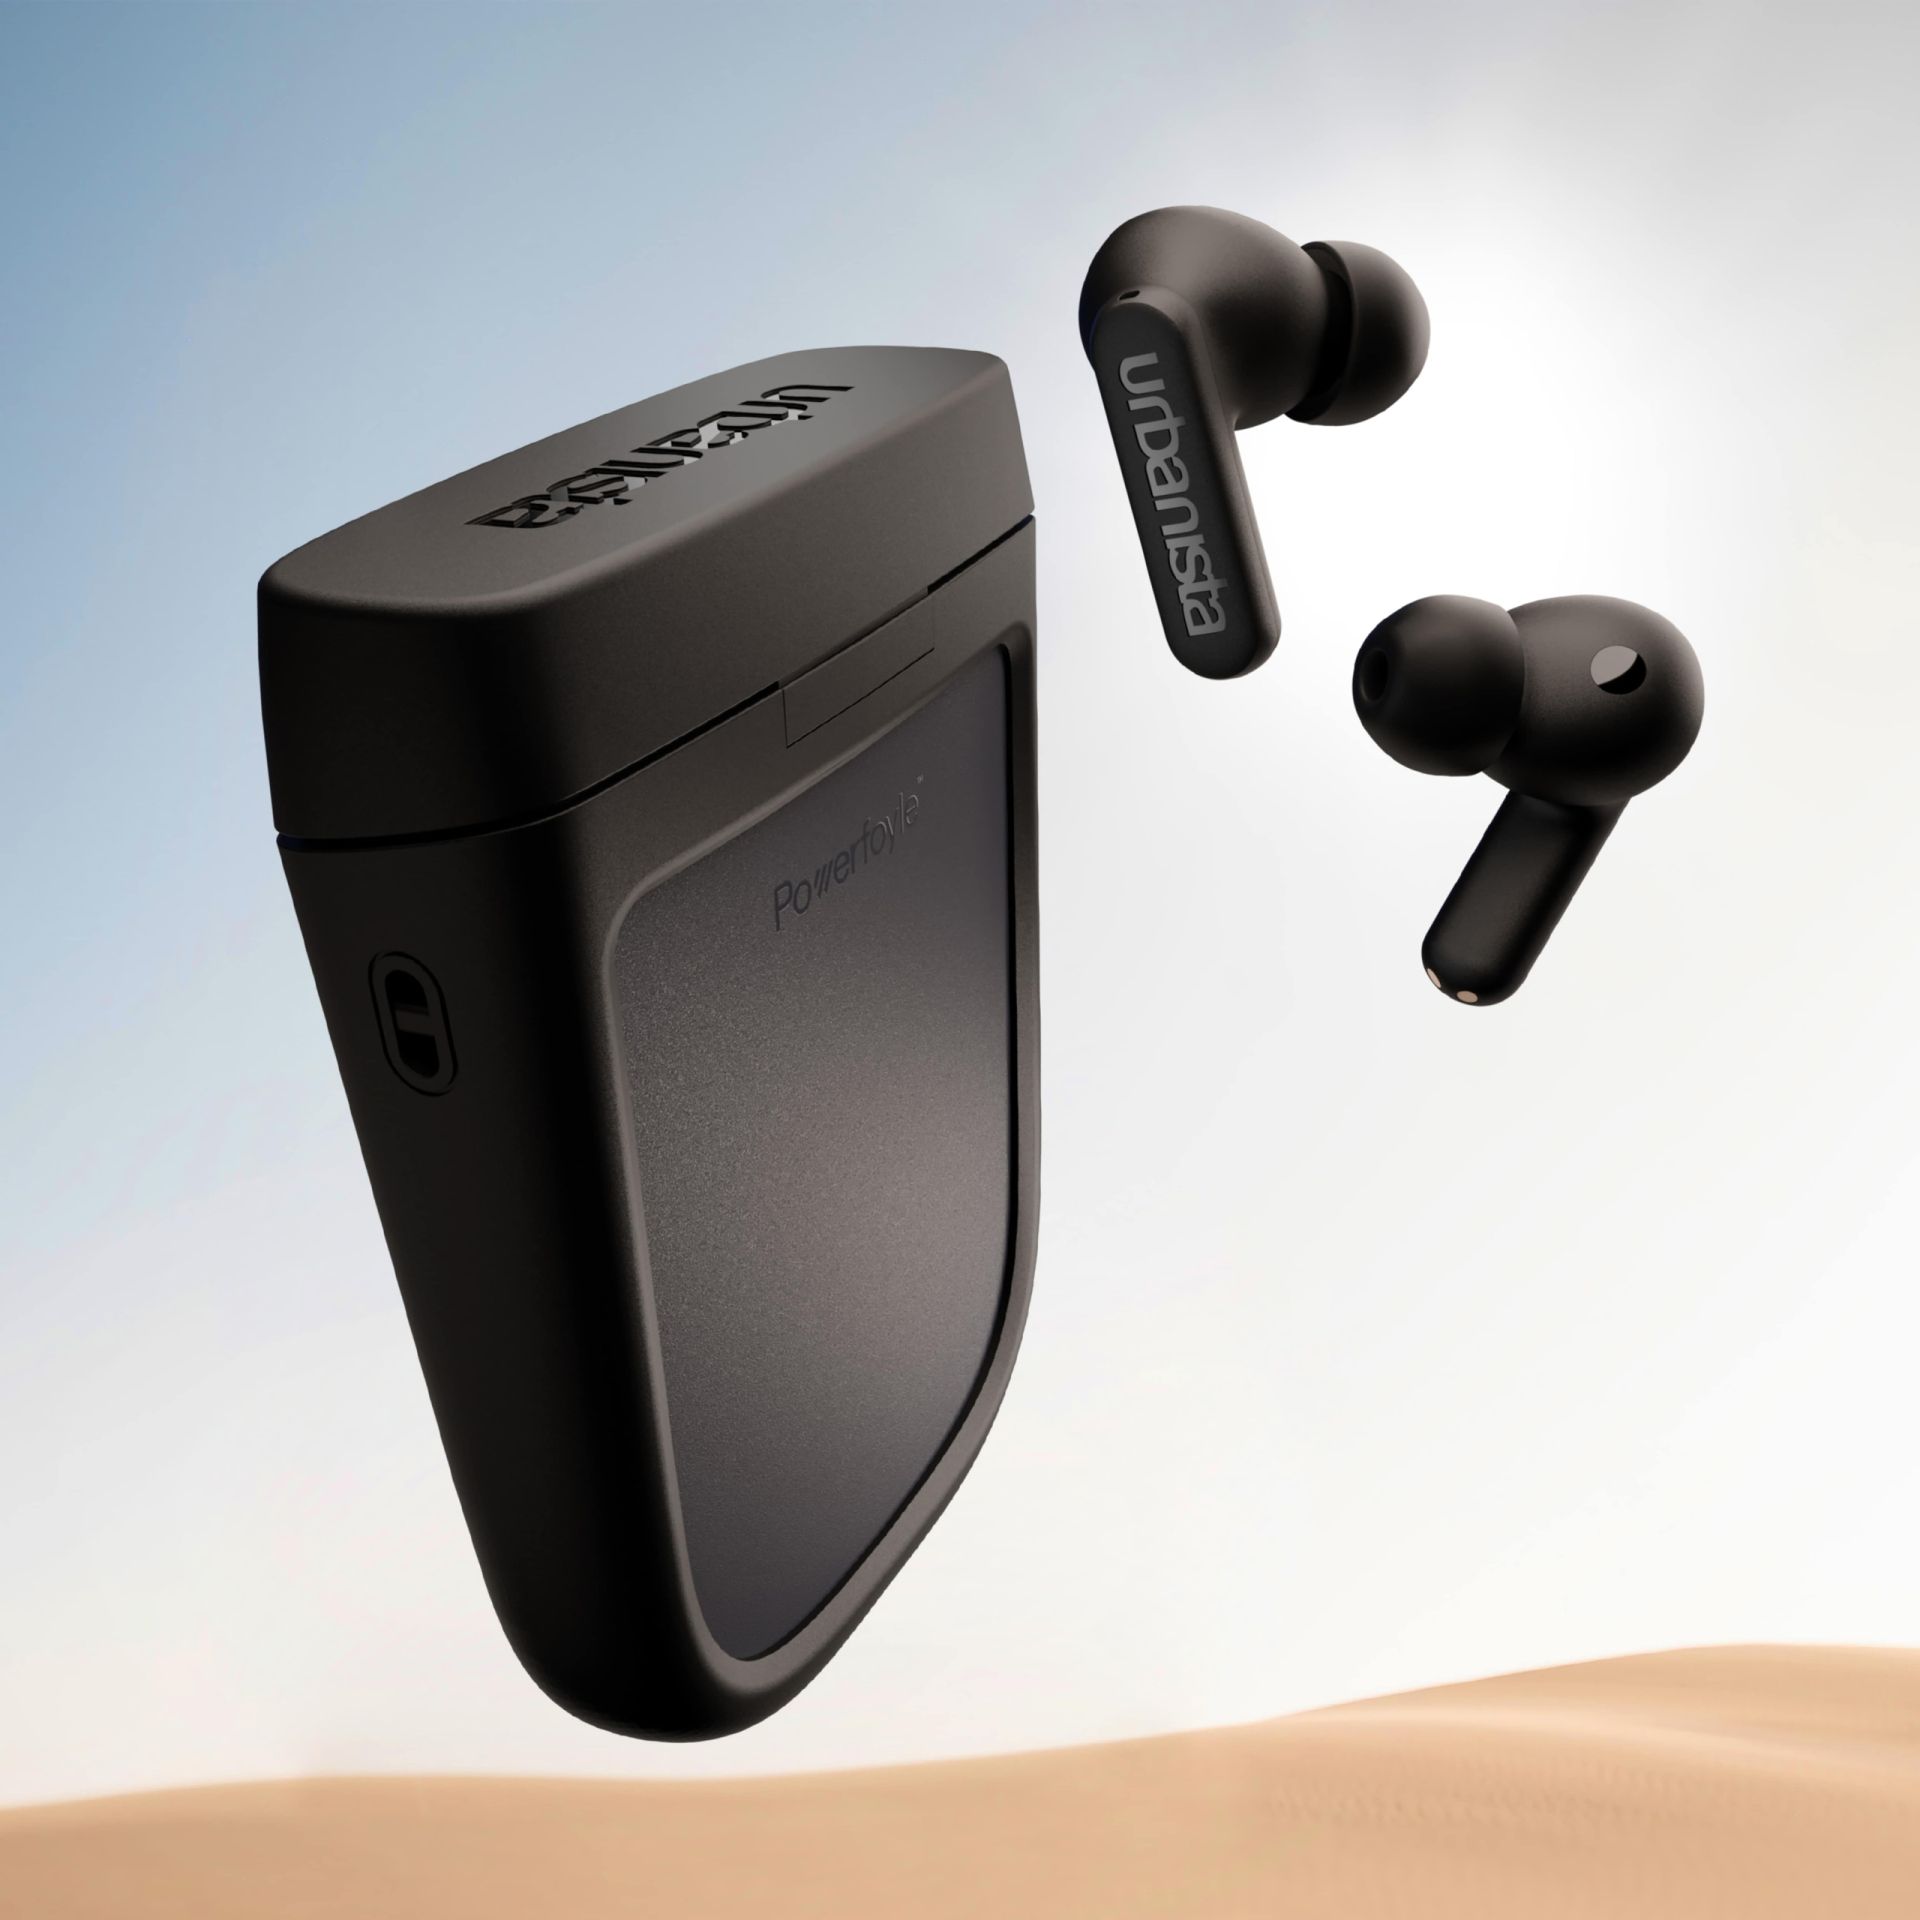 Exeger partners with Urbanista to launch true wireless earphones with endless playtime 